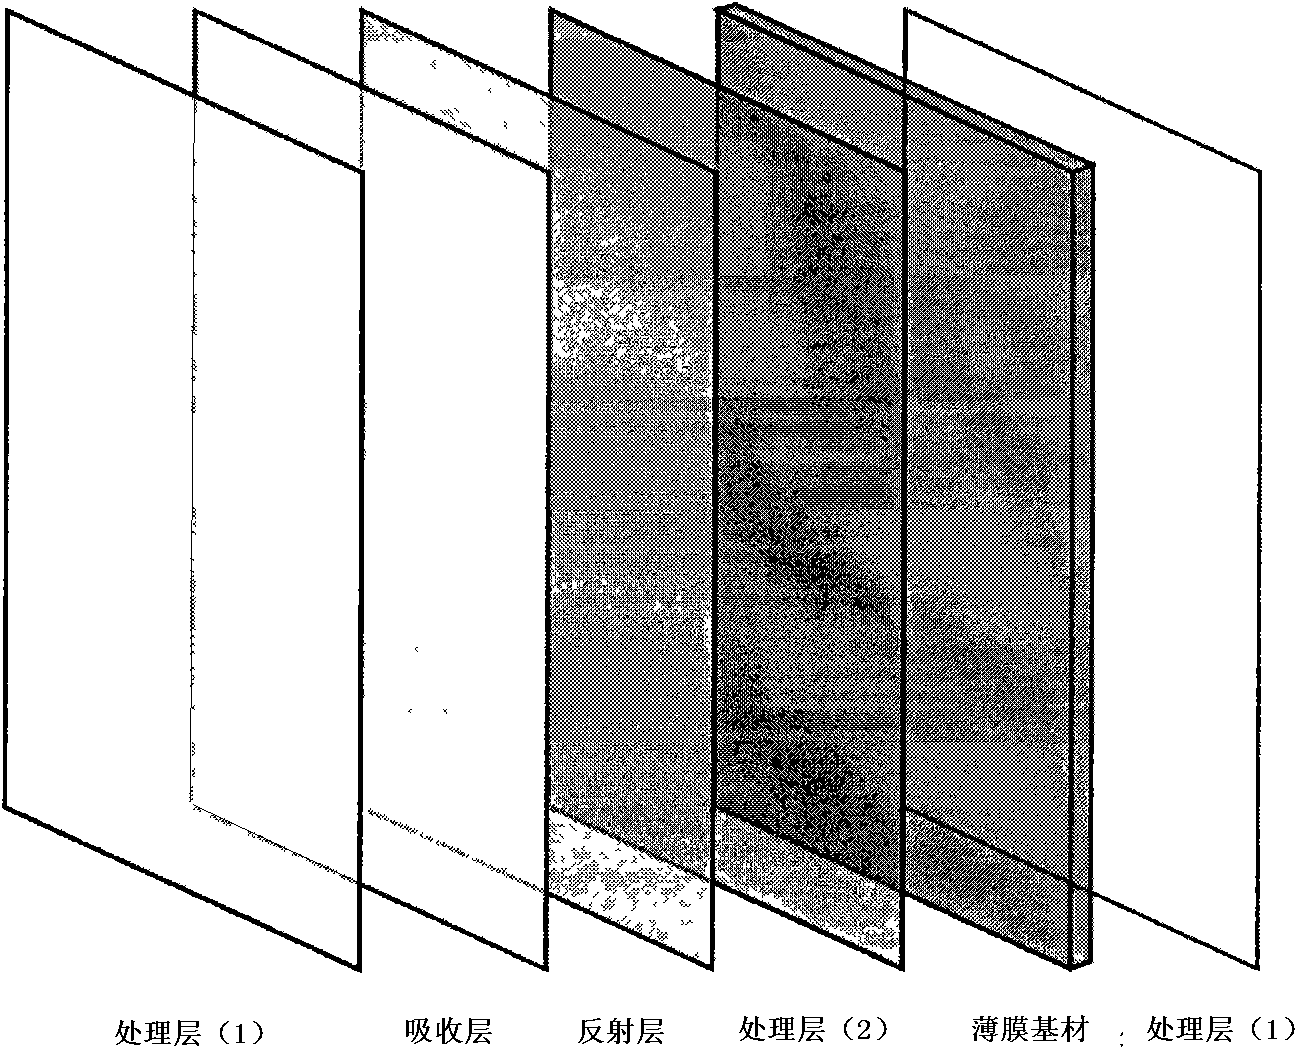 Method for preparing low-emission thermal insulation film for laminated glass